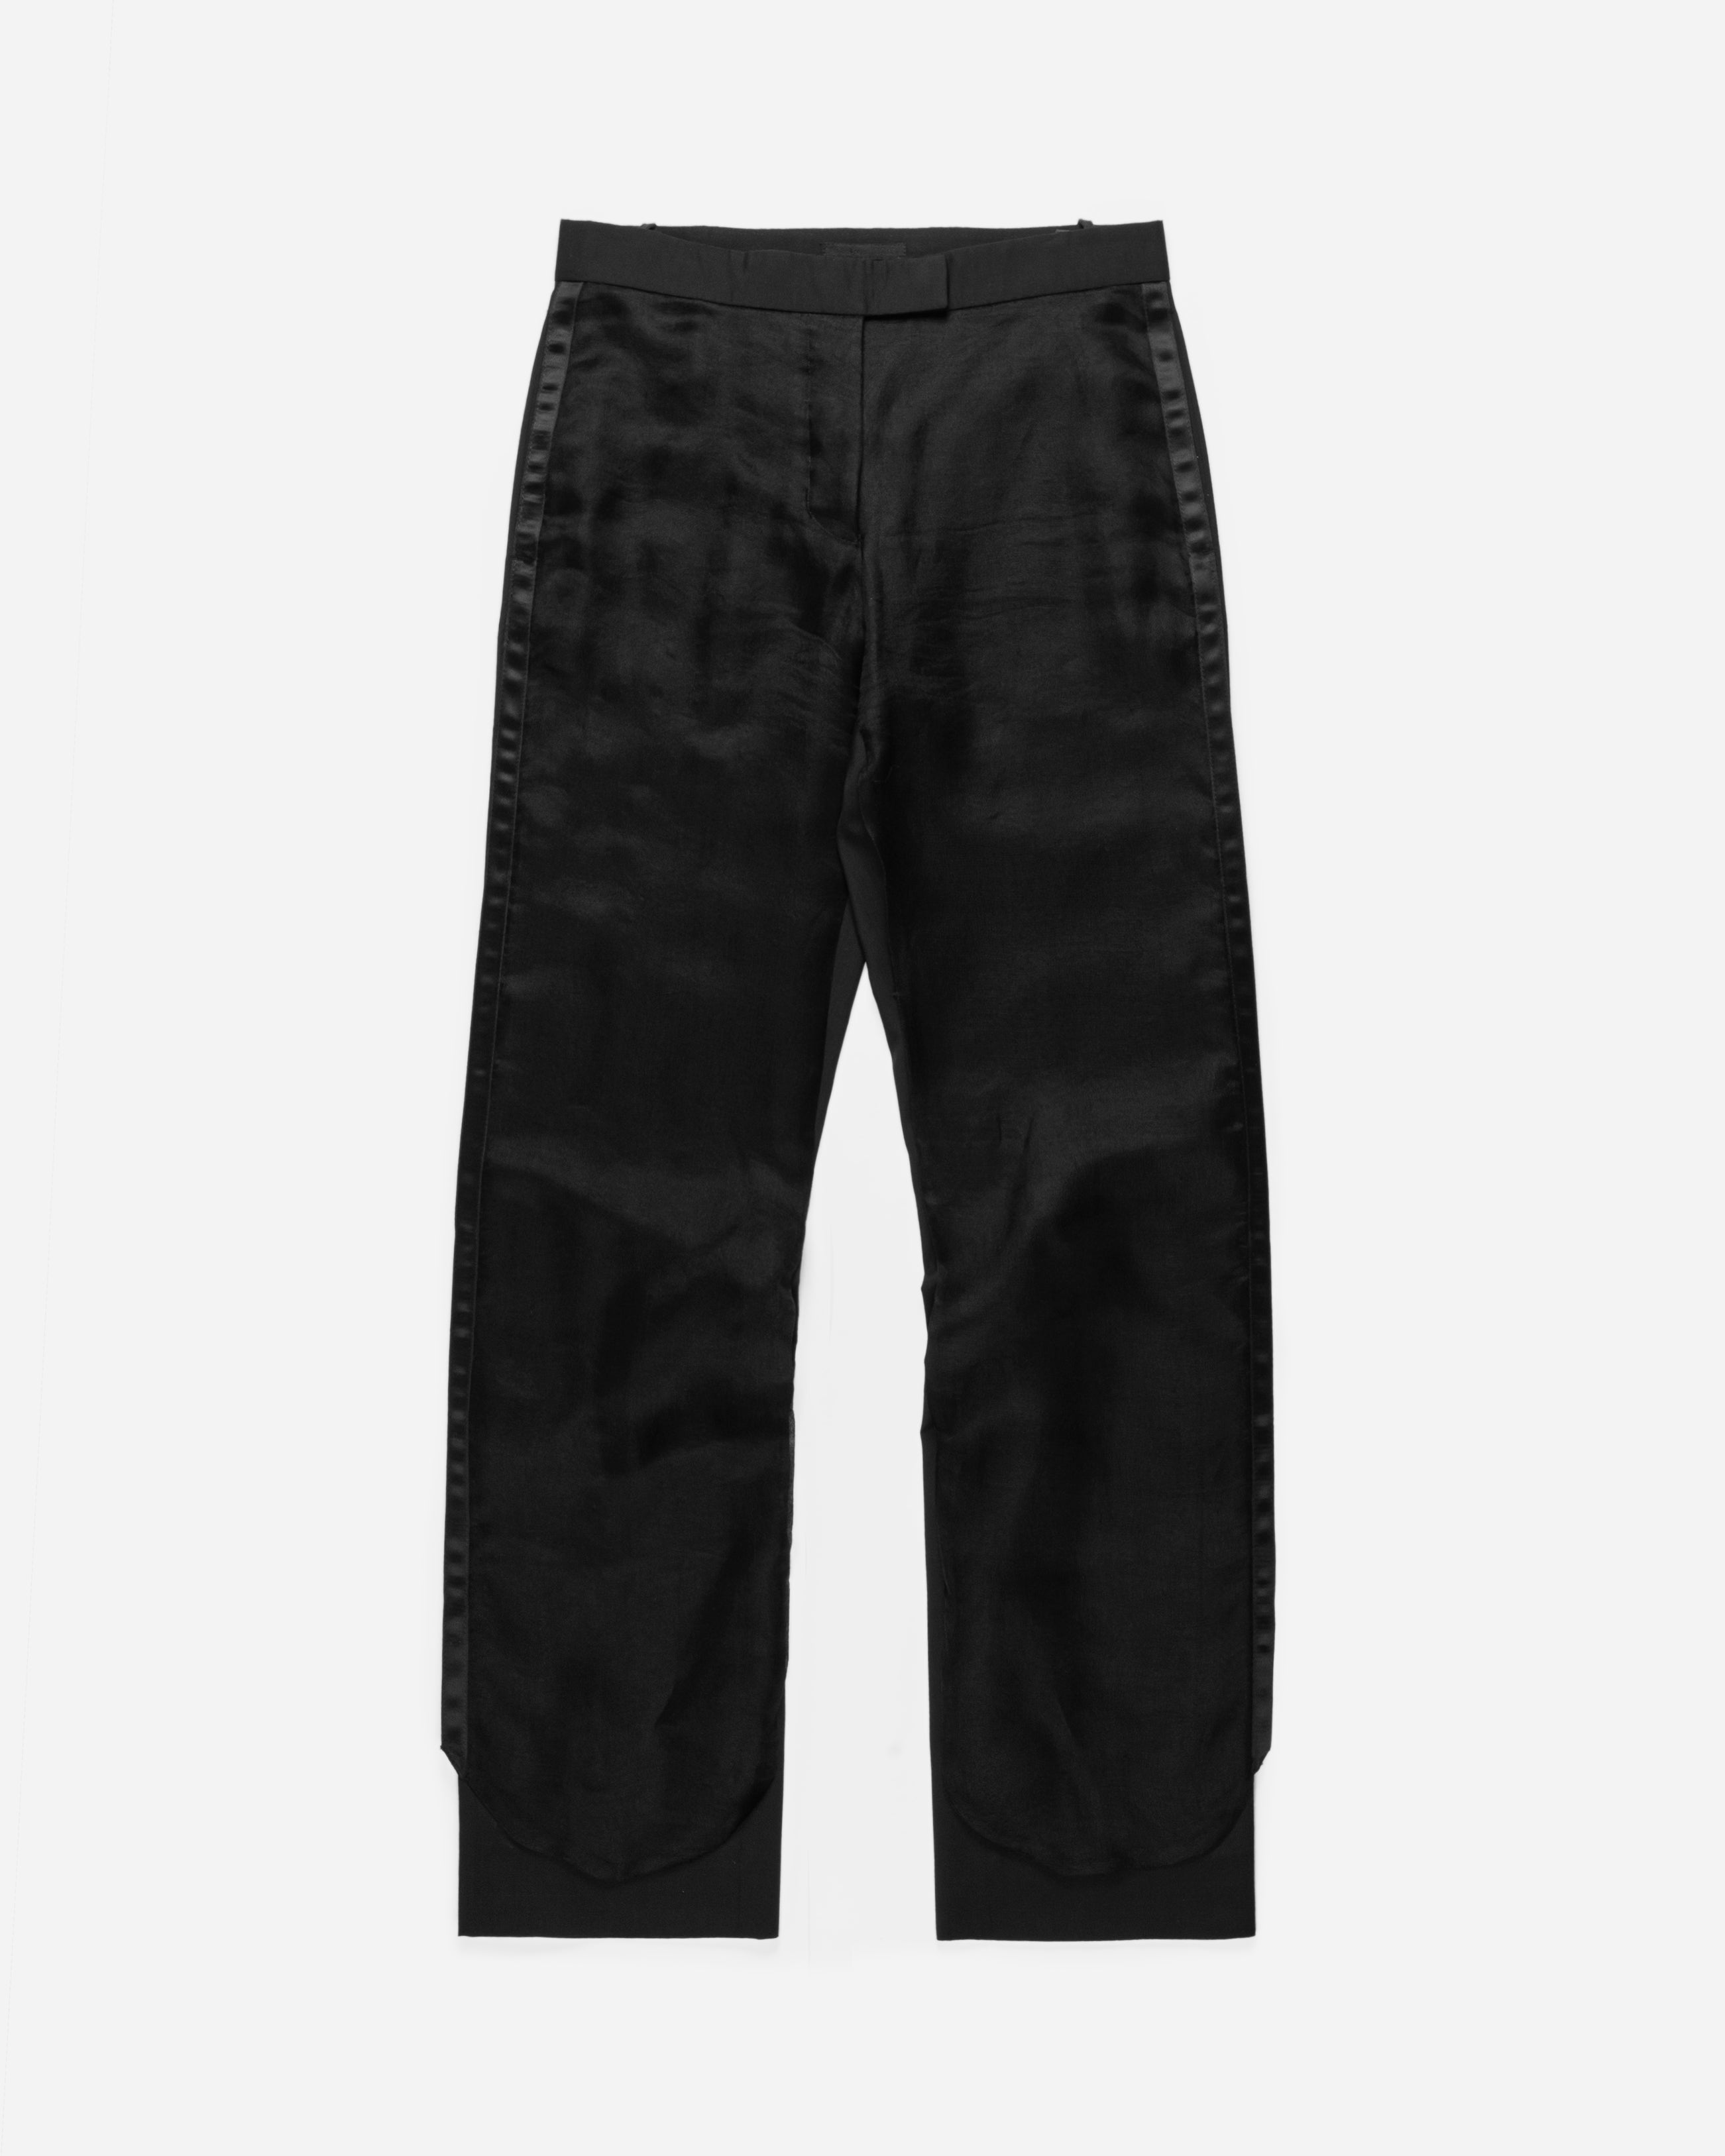 helmut lang trousers, Men's Fashion, Bottoms, Trousers on Carousell